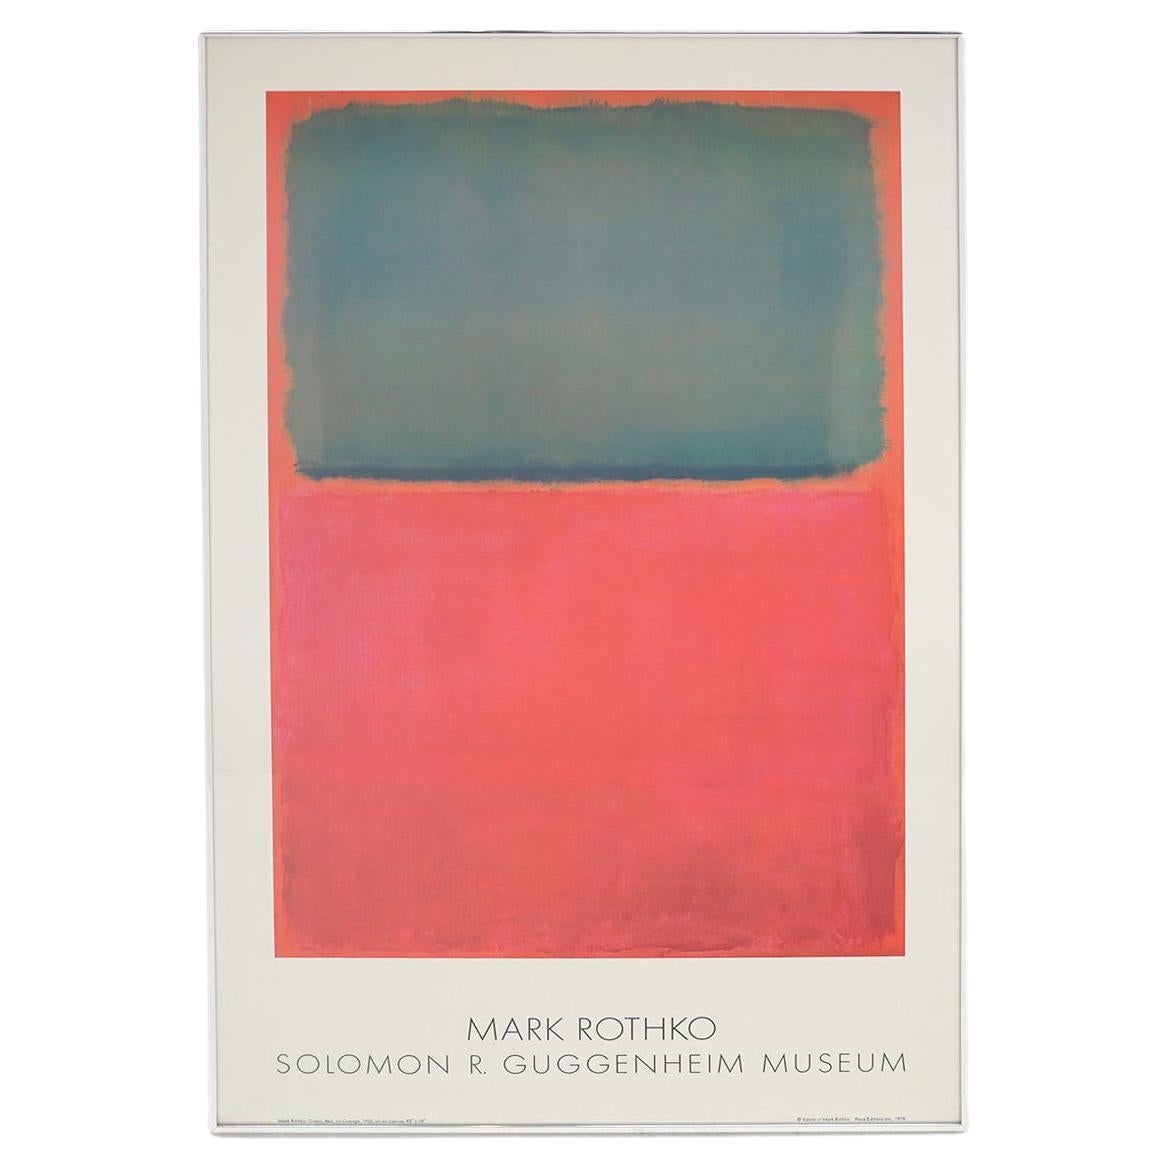 Mark Rothko Exhibition Poster, "Green Red on Orange", Pace Editions, 1978